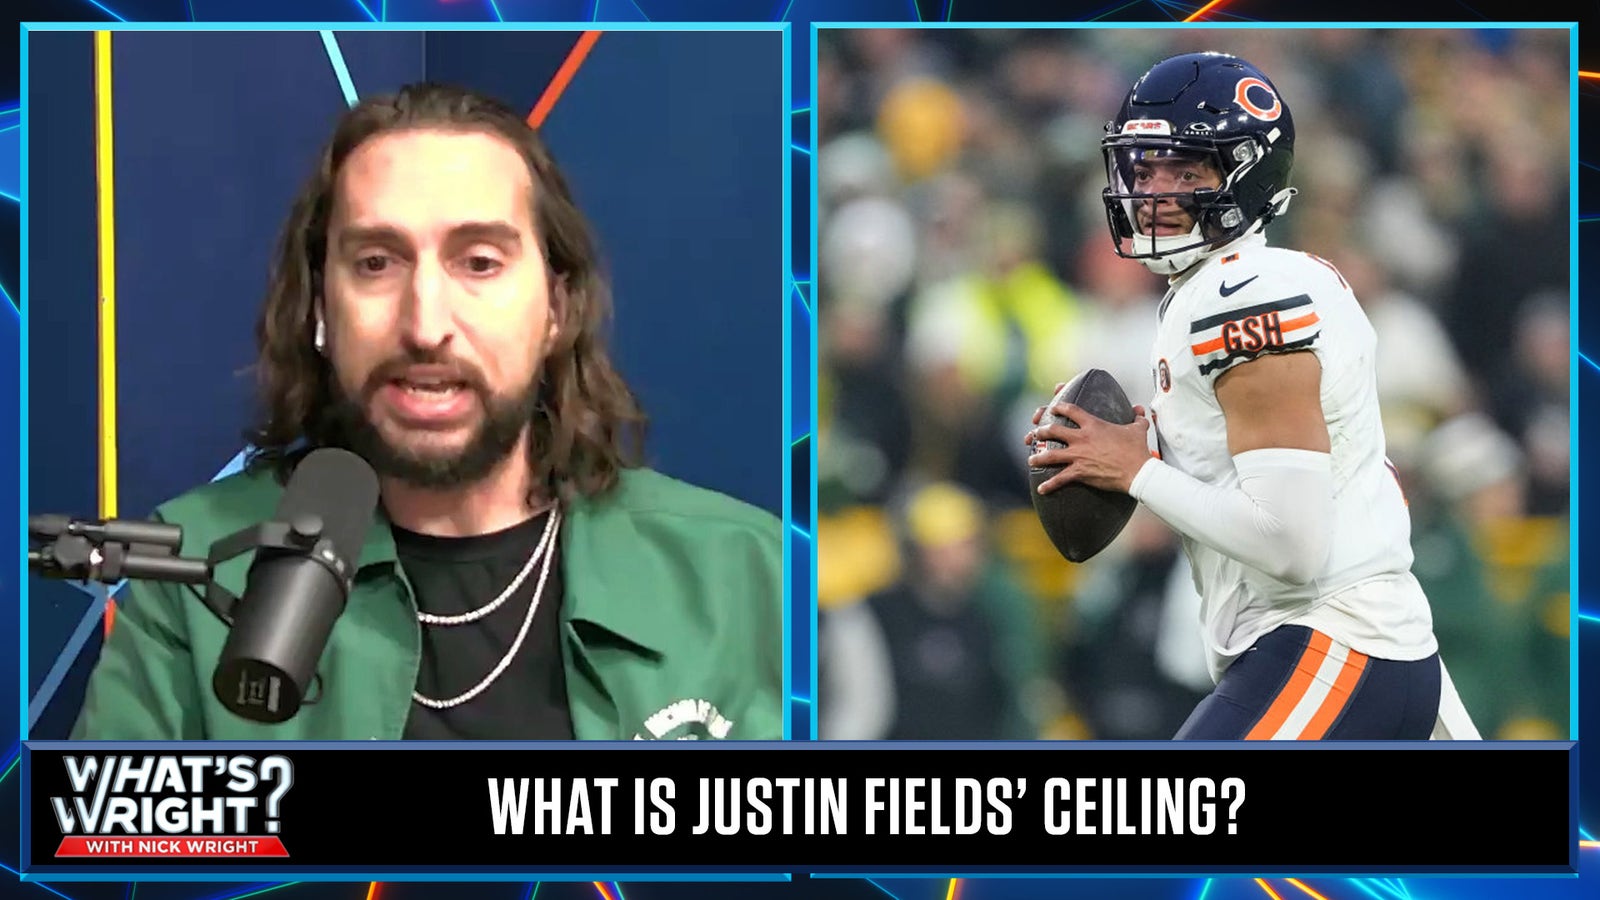 Nick says Justin Fields will ultimately start for the Steelers over Russell Wilson